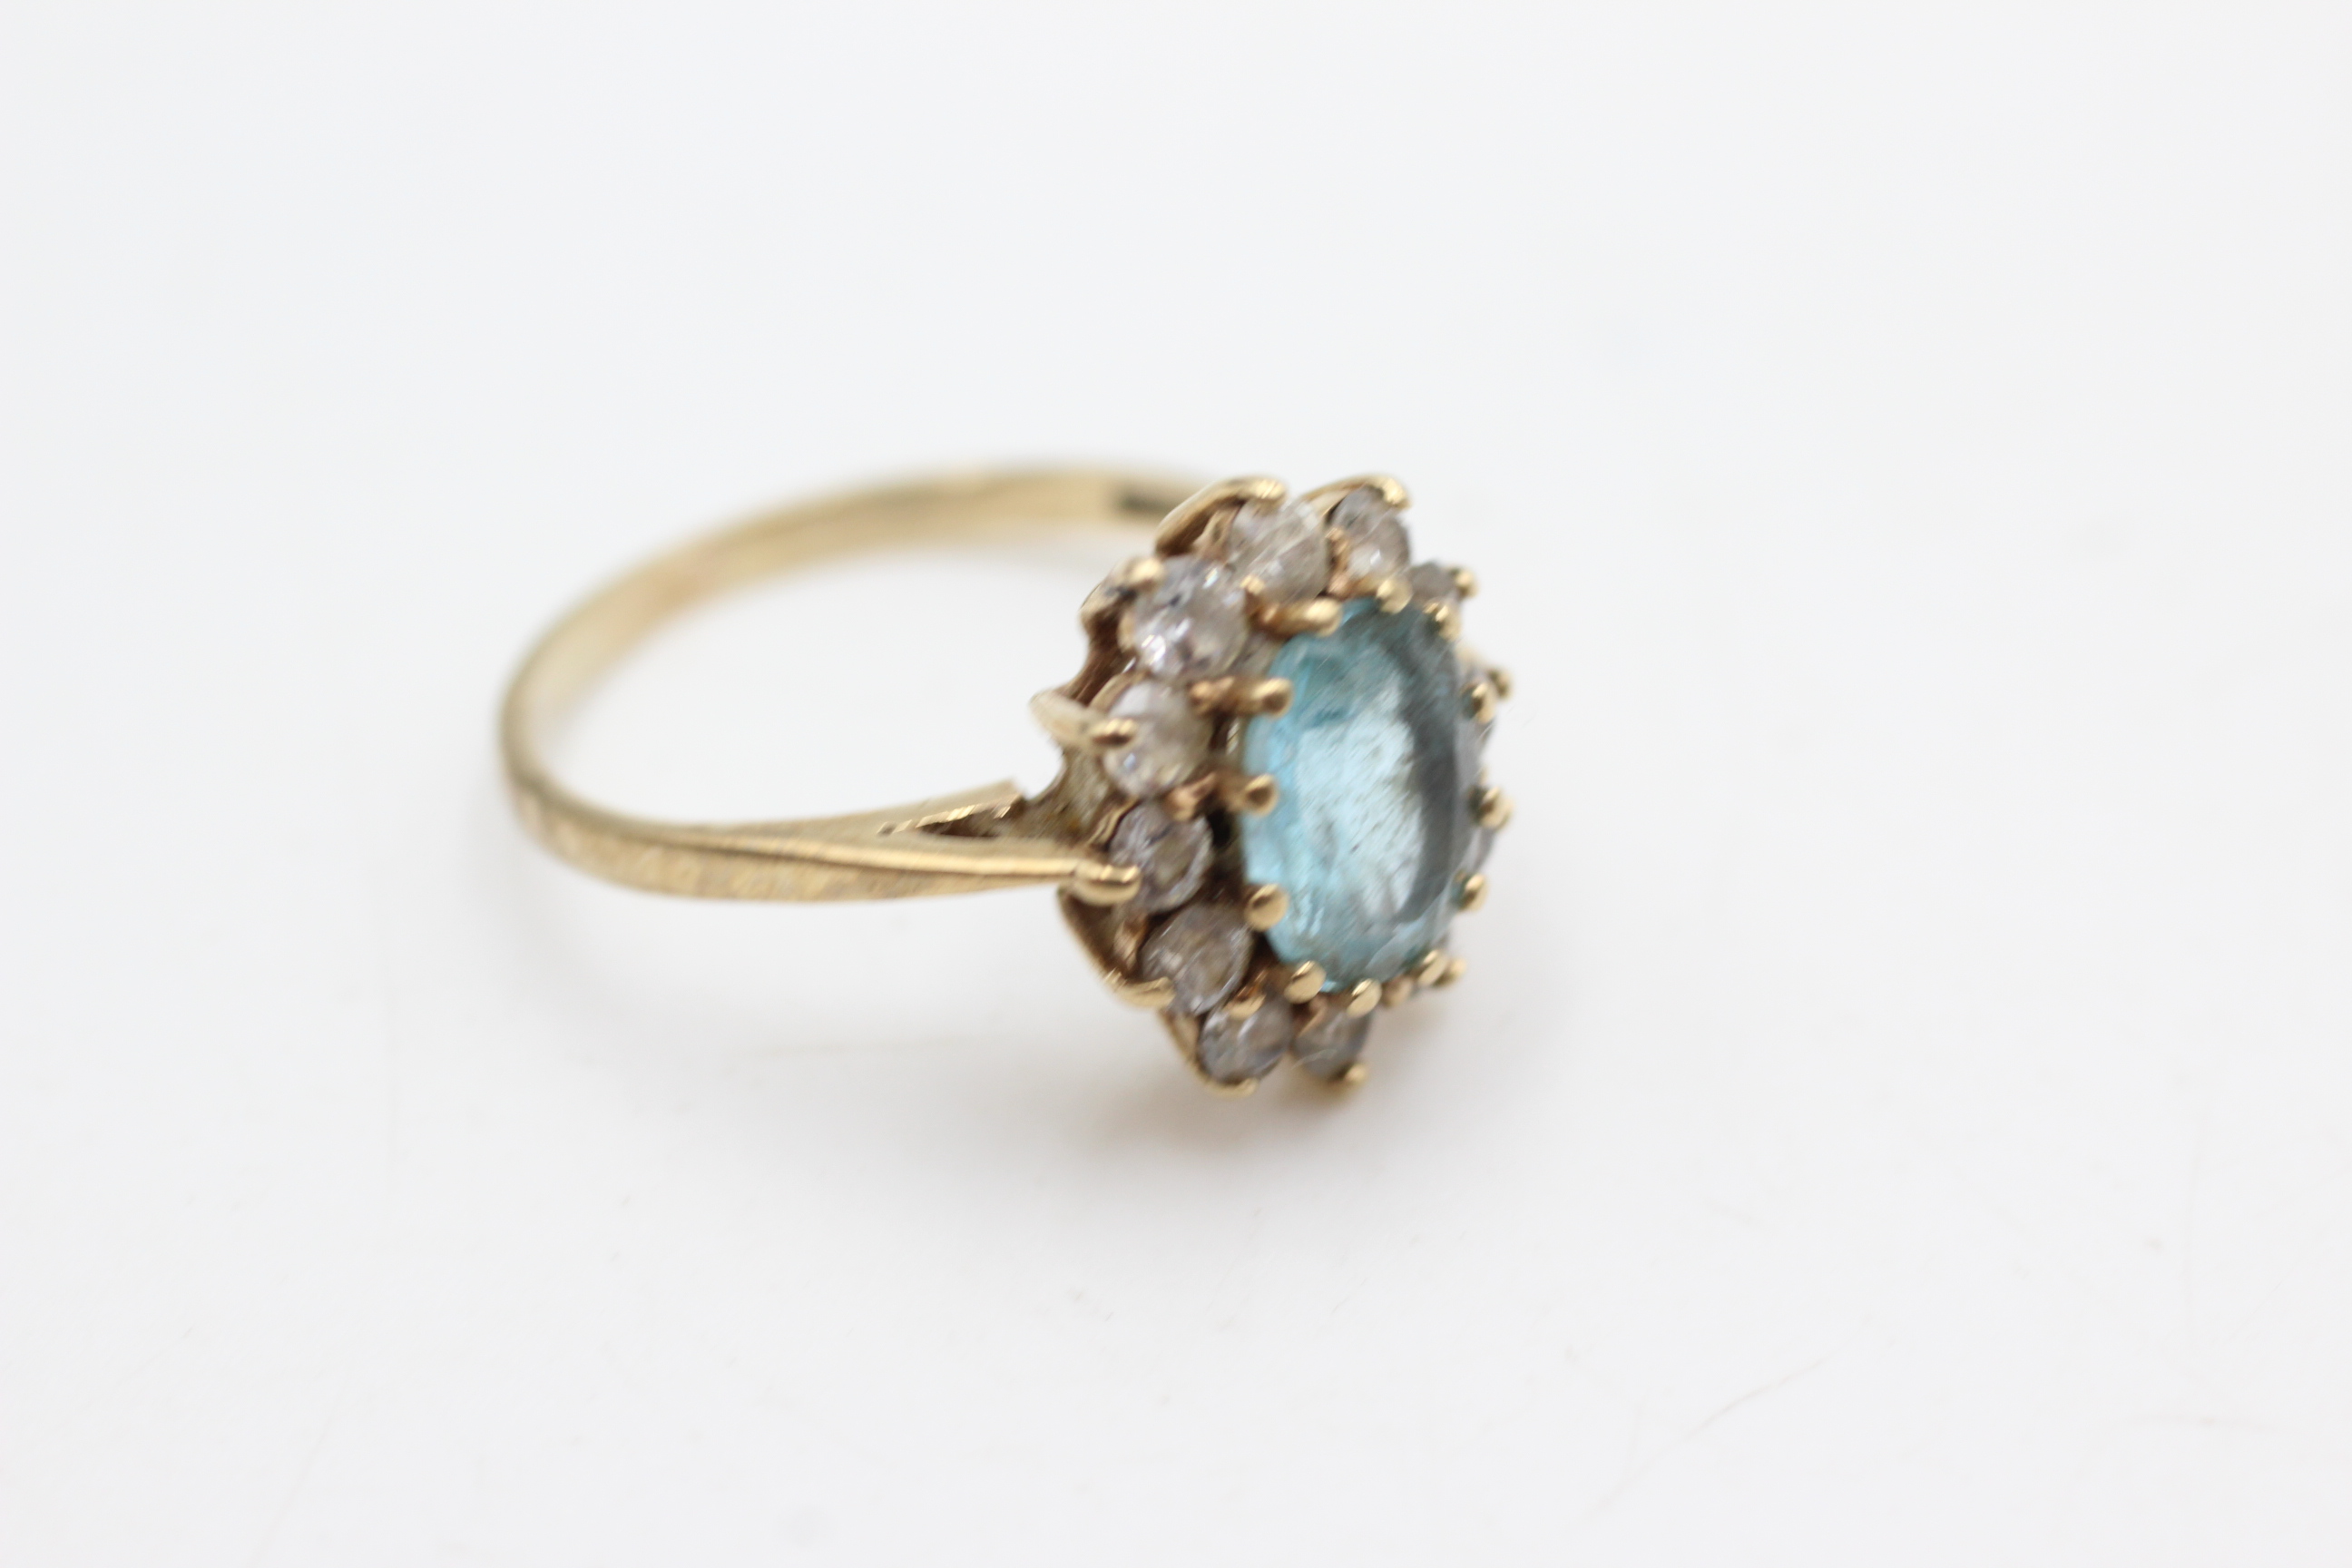 9ct gold blue topaz & clear gemstone halo dress ring (3.4g) - Image 2 of 4